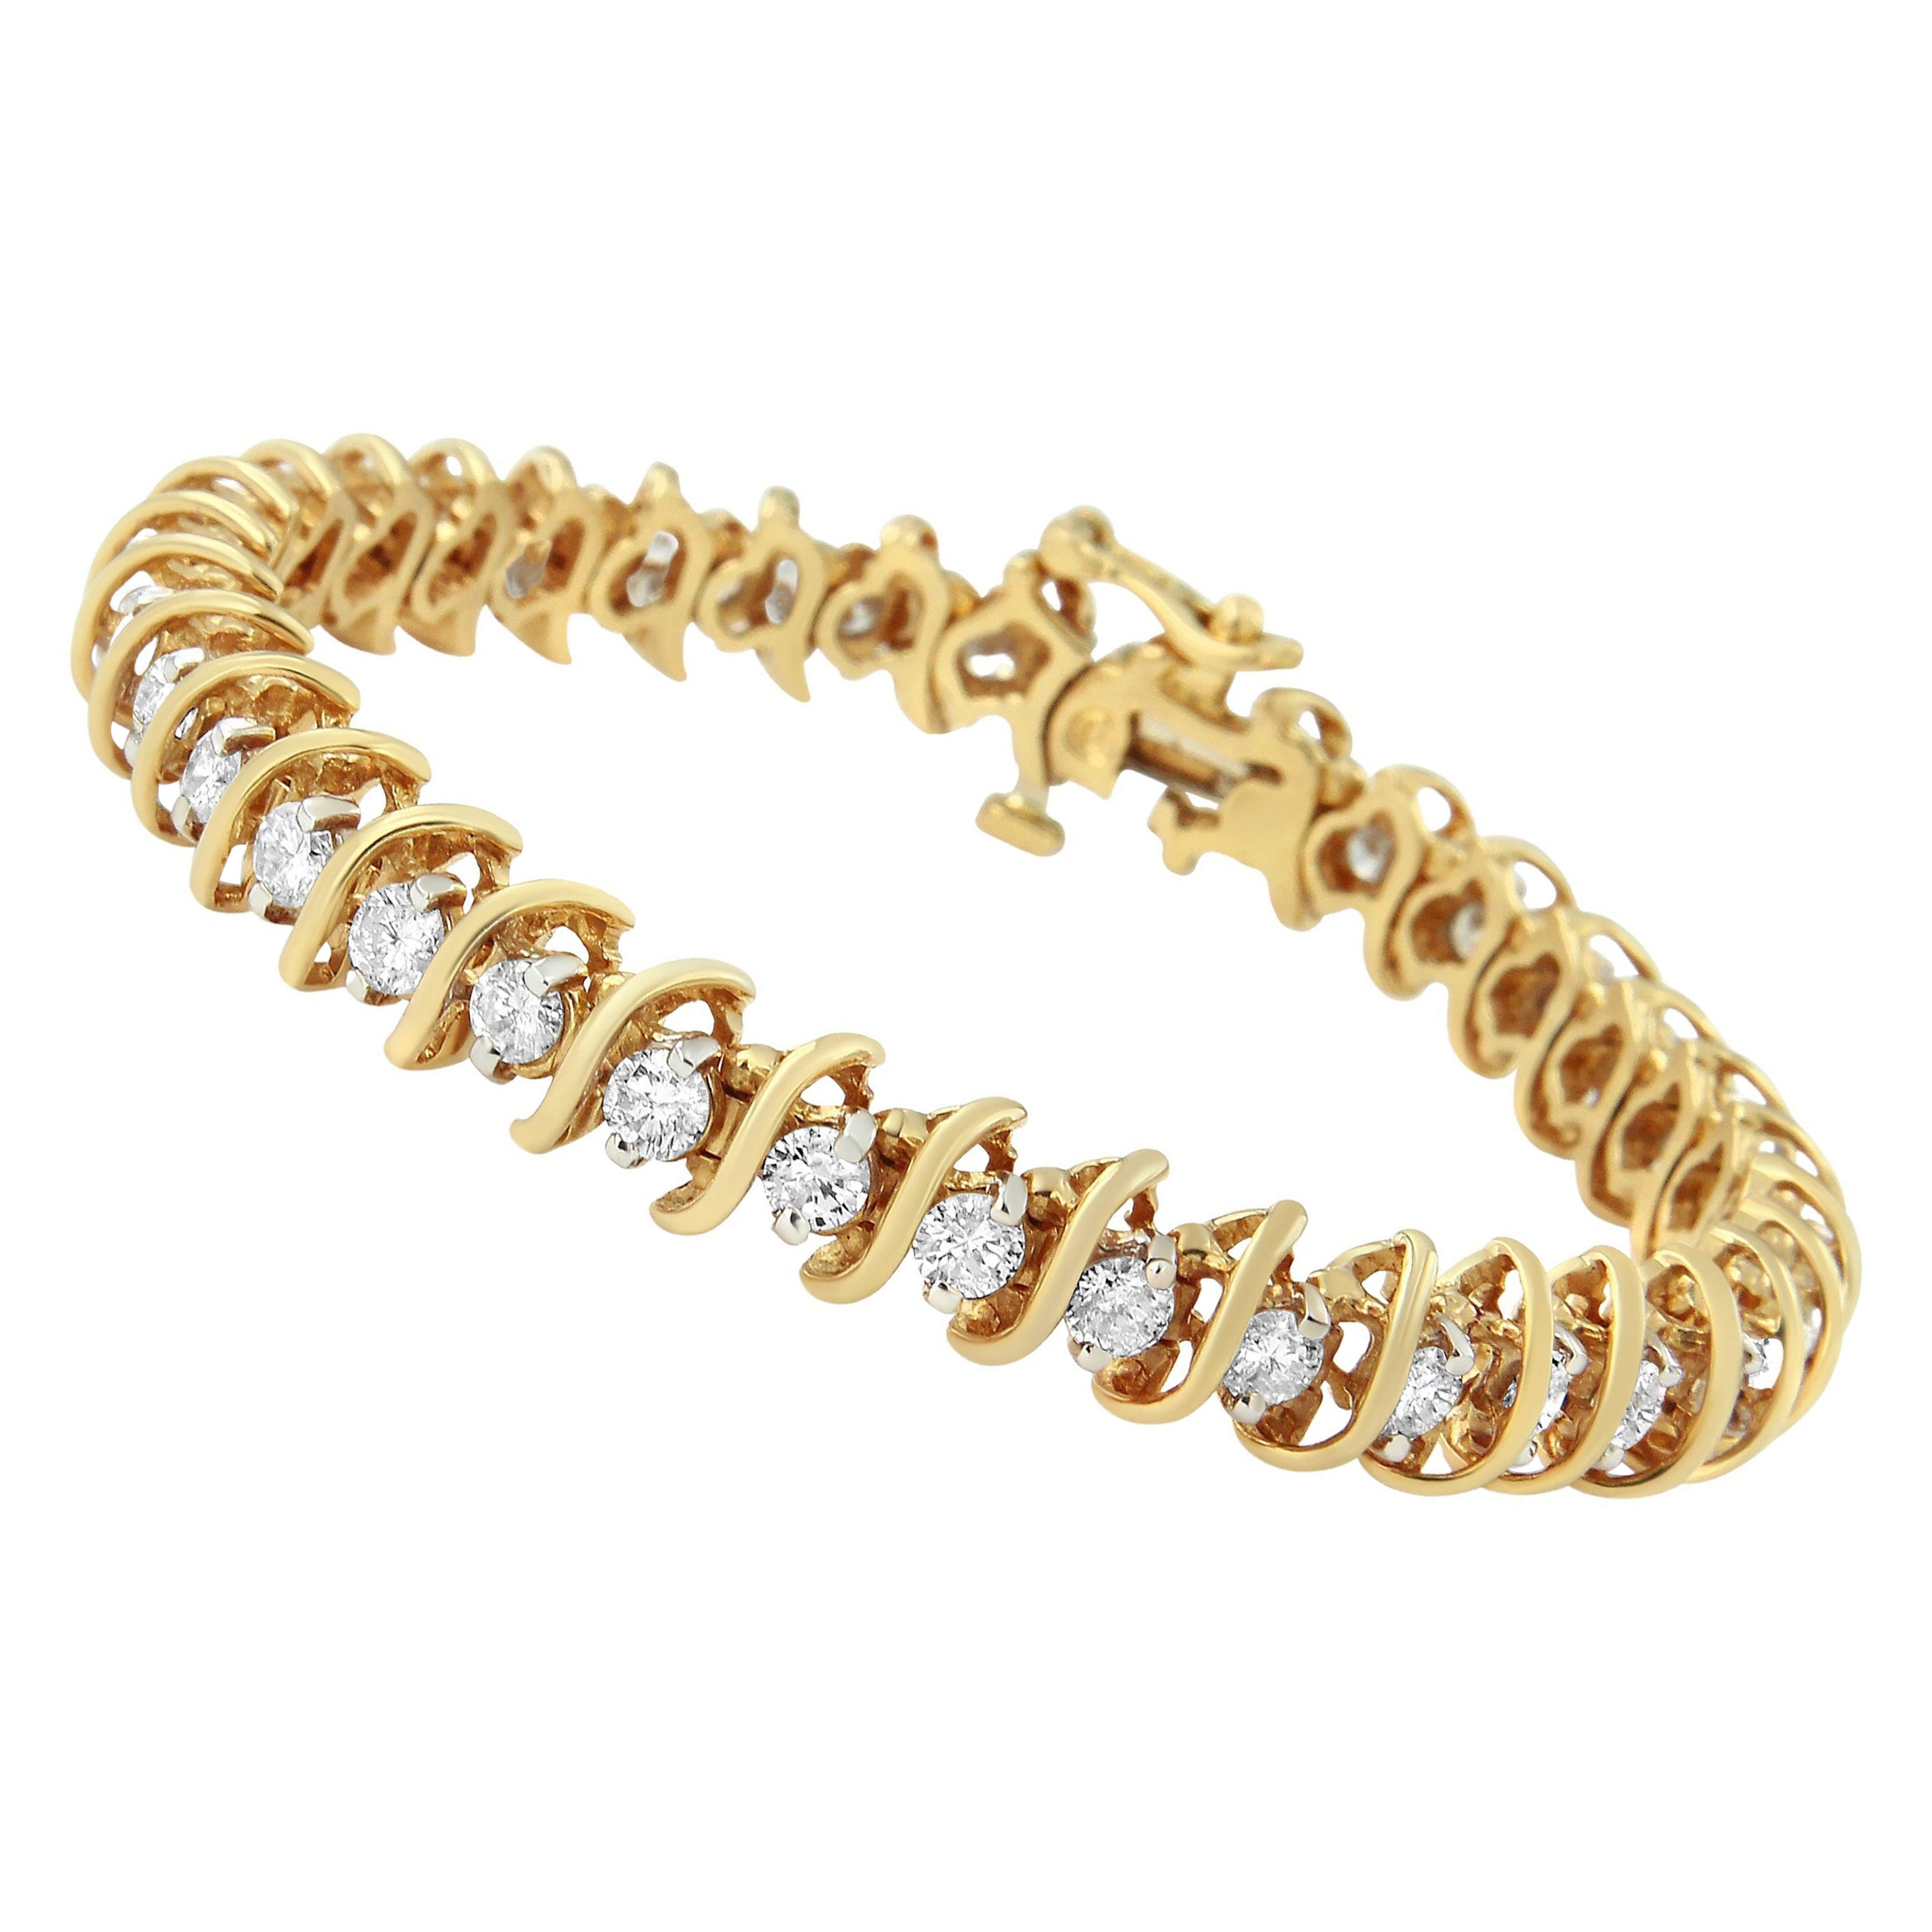 AGS Certified 18K Yellow Gold 5.00 Cttw "S" Link Round Diamond Tennis Bracelet For Sale